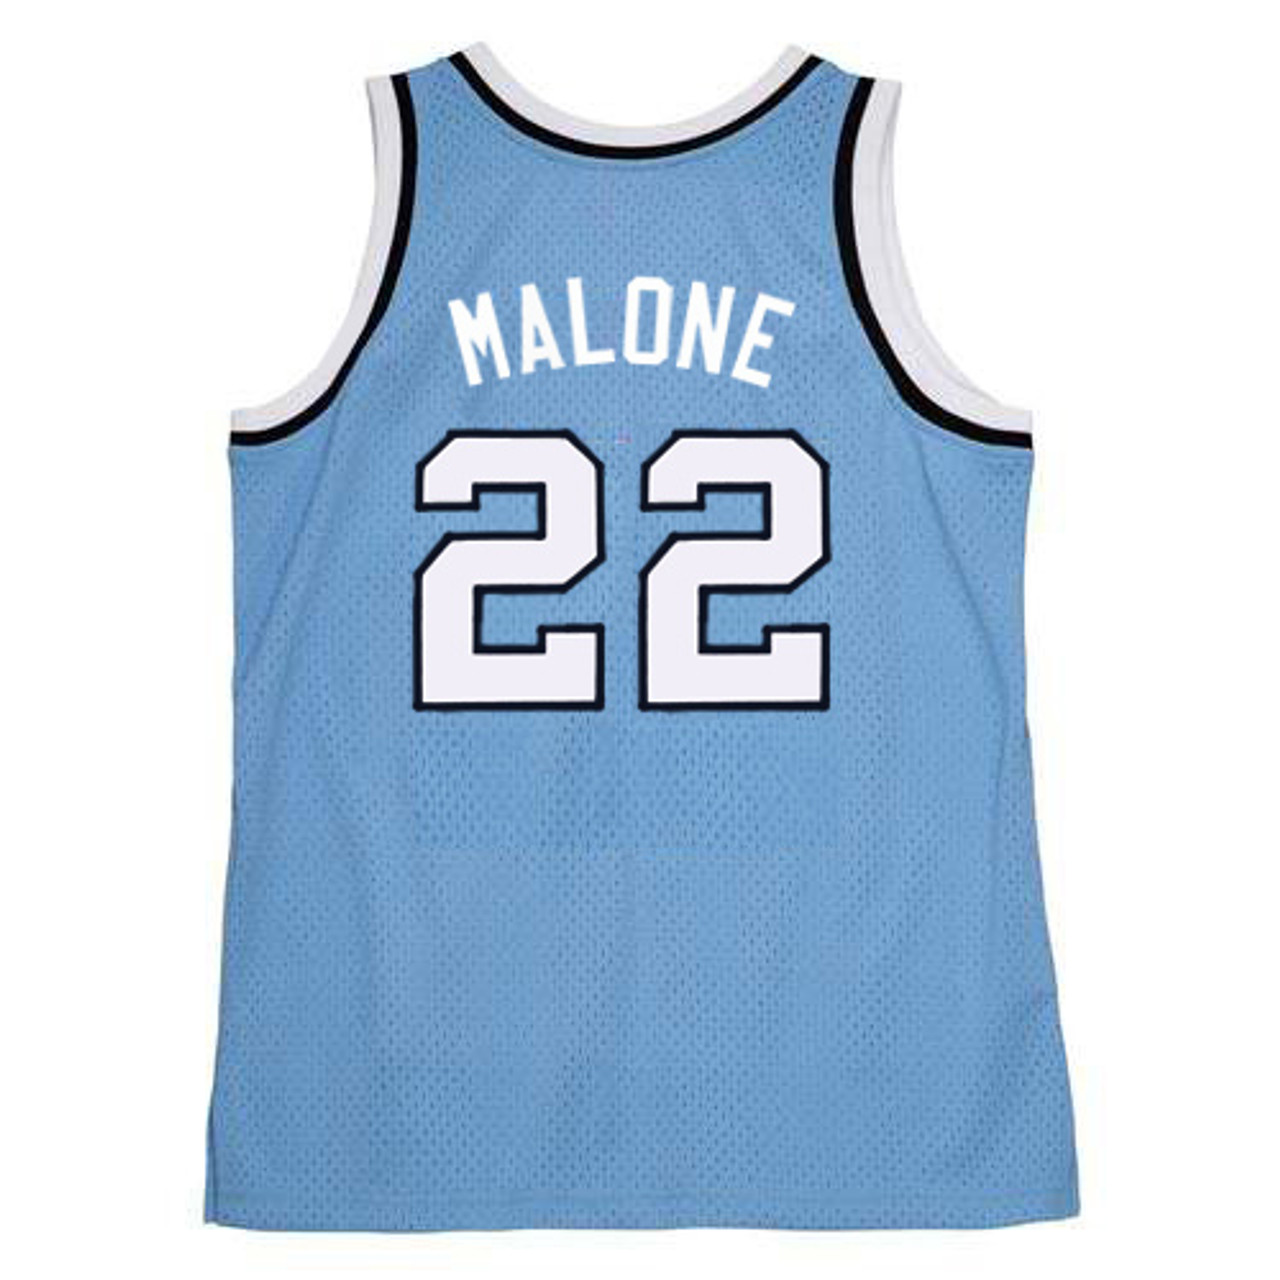 Vintage 1983 Moses Malone Jersey Tee